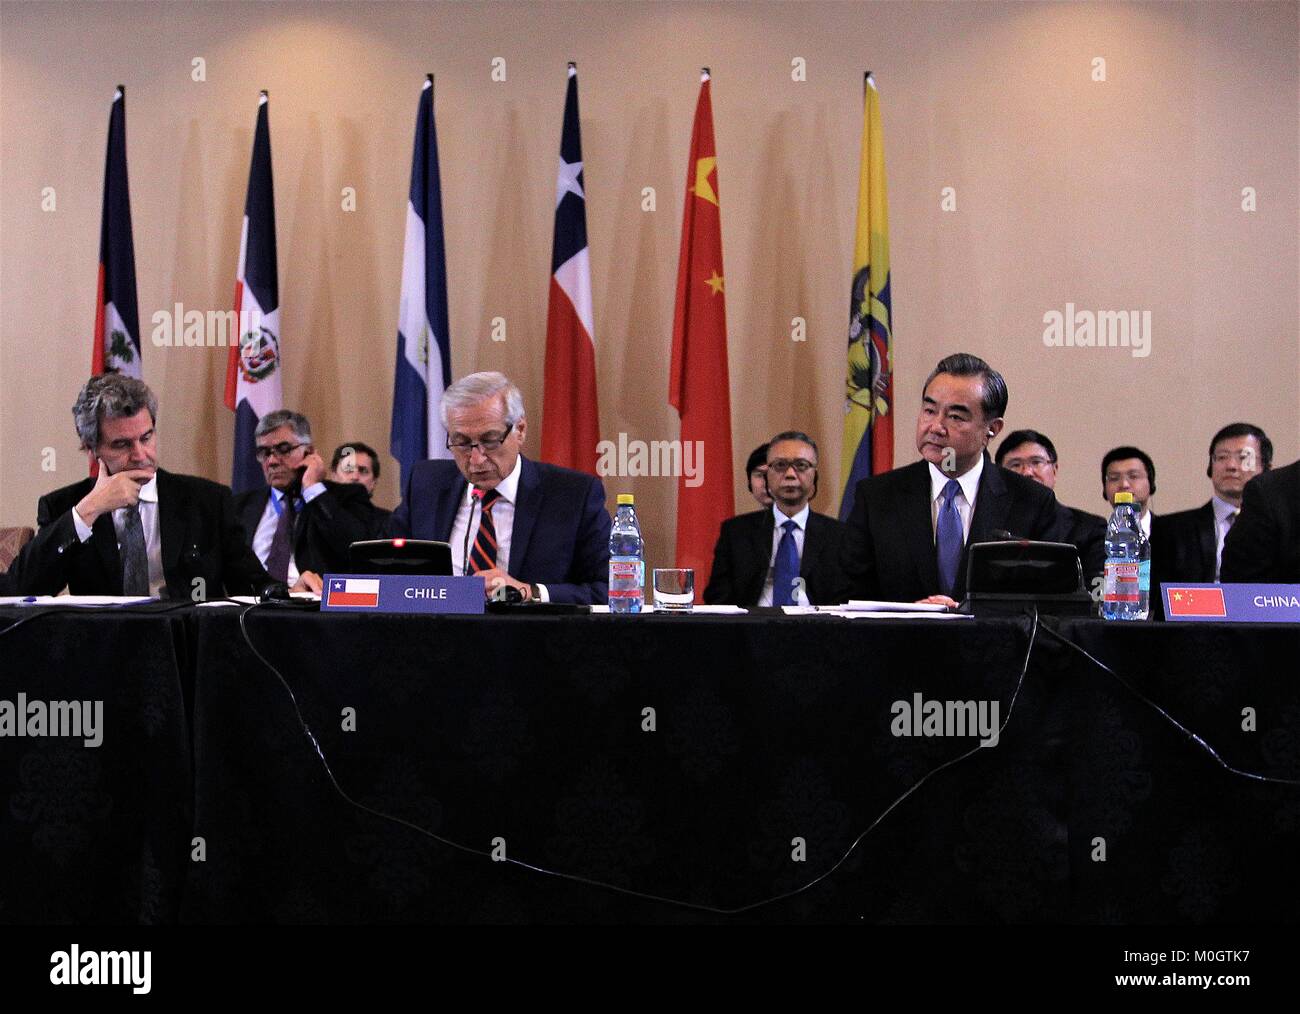 (180122) -- SANTIAGO, Jan. 22, 2018 (Xinhua) -- Chinese Foreign Minister Wang Yi (front R) attends a meeting with foreign ministers from Chile, the Dominican Republic, Ecuador and Haiti, as well as the representative of El Salvador, in Santiago, Chile, Jan. 21, 2018. (Xinhua/Xu Rui) (djj) Stock Photo